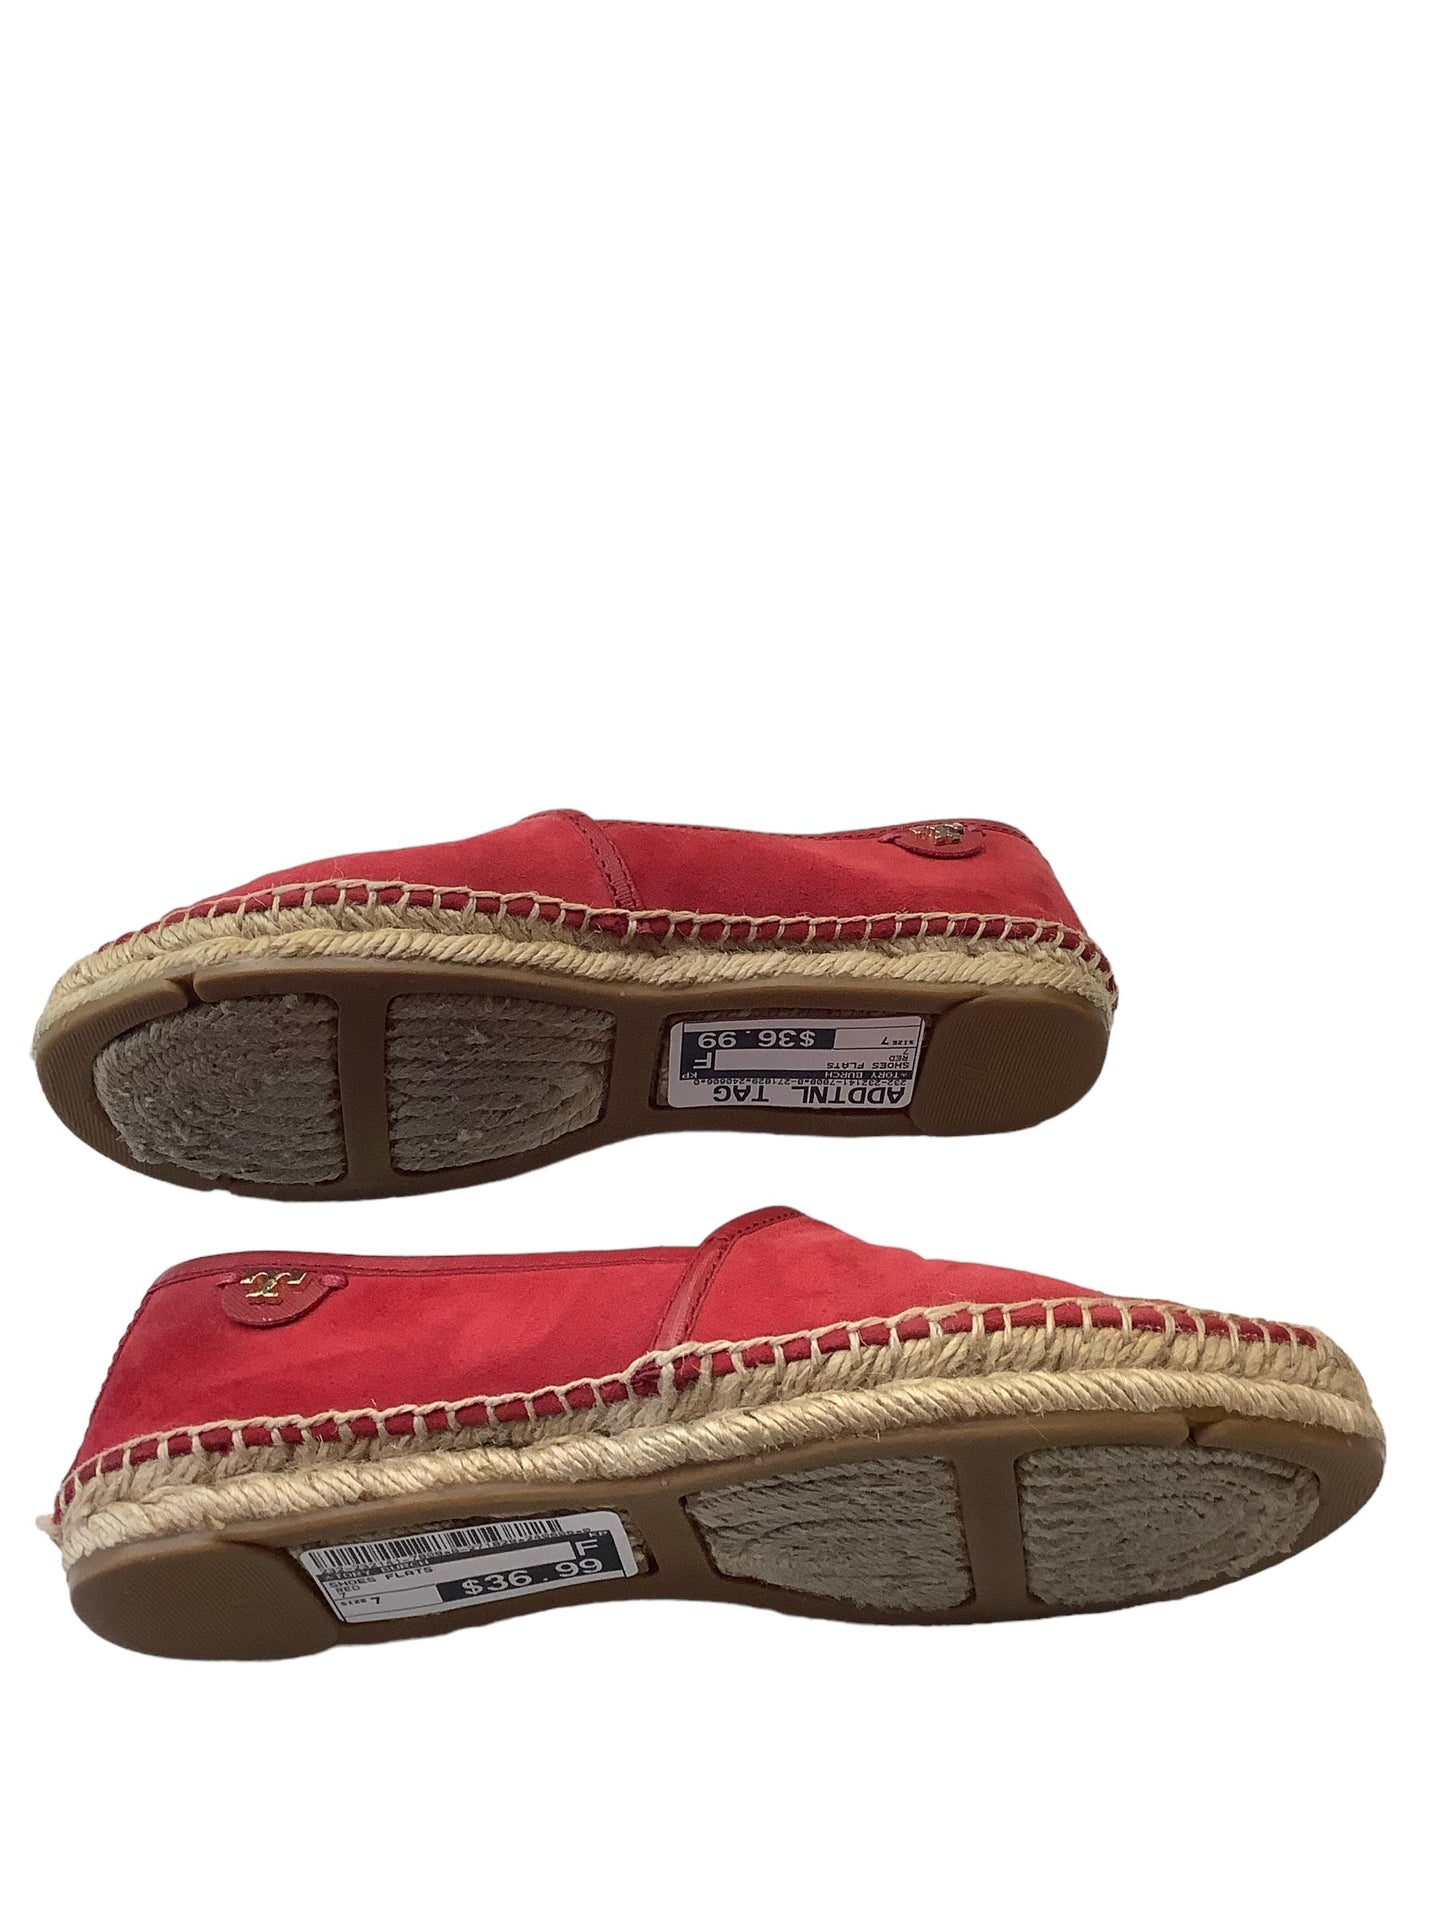 Red Shoes Flats Tory Burch, Size 7